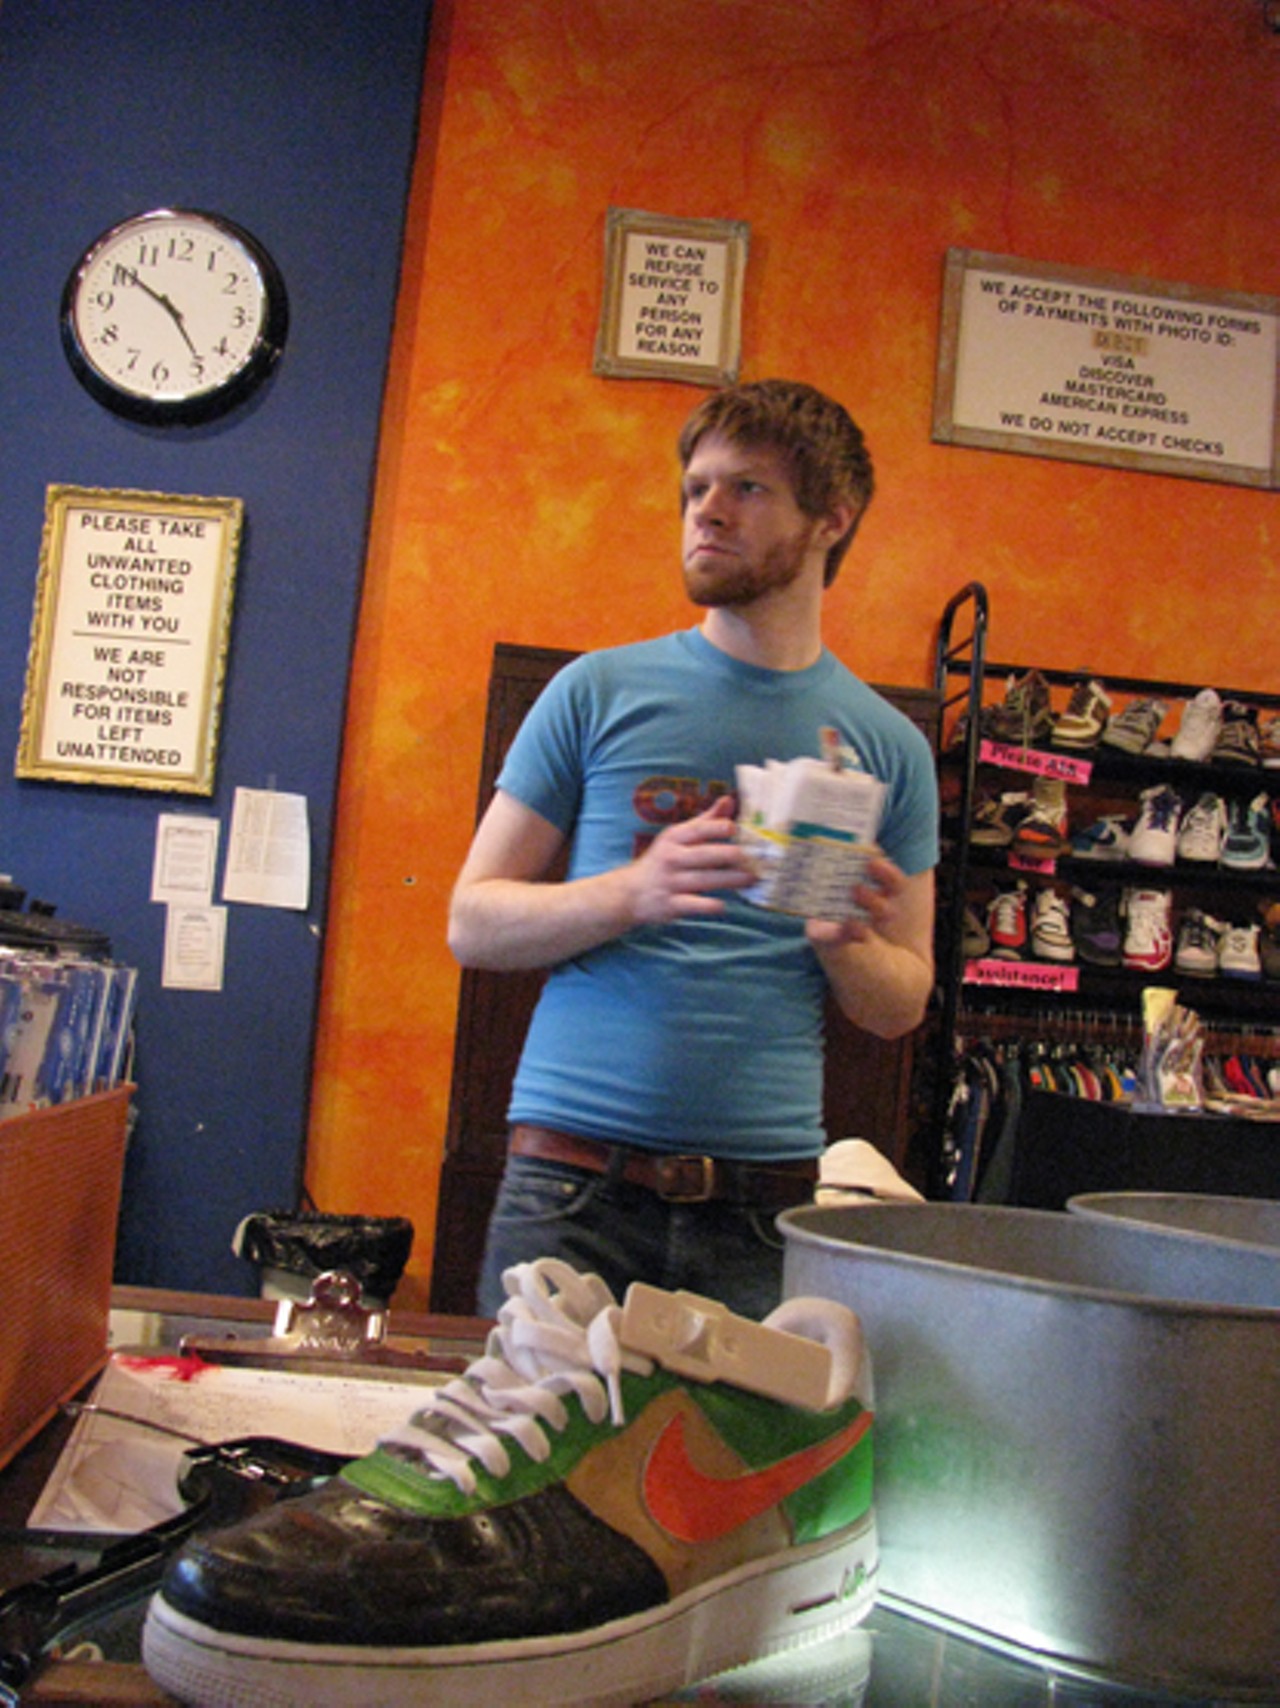 Rag-O-Rama employee Nate Bethel and one of the store's best assets, sick Nike sneaks, Bethel reported.